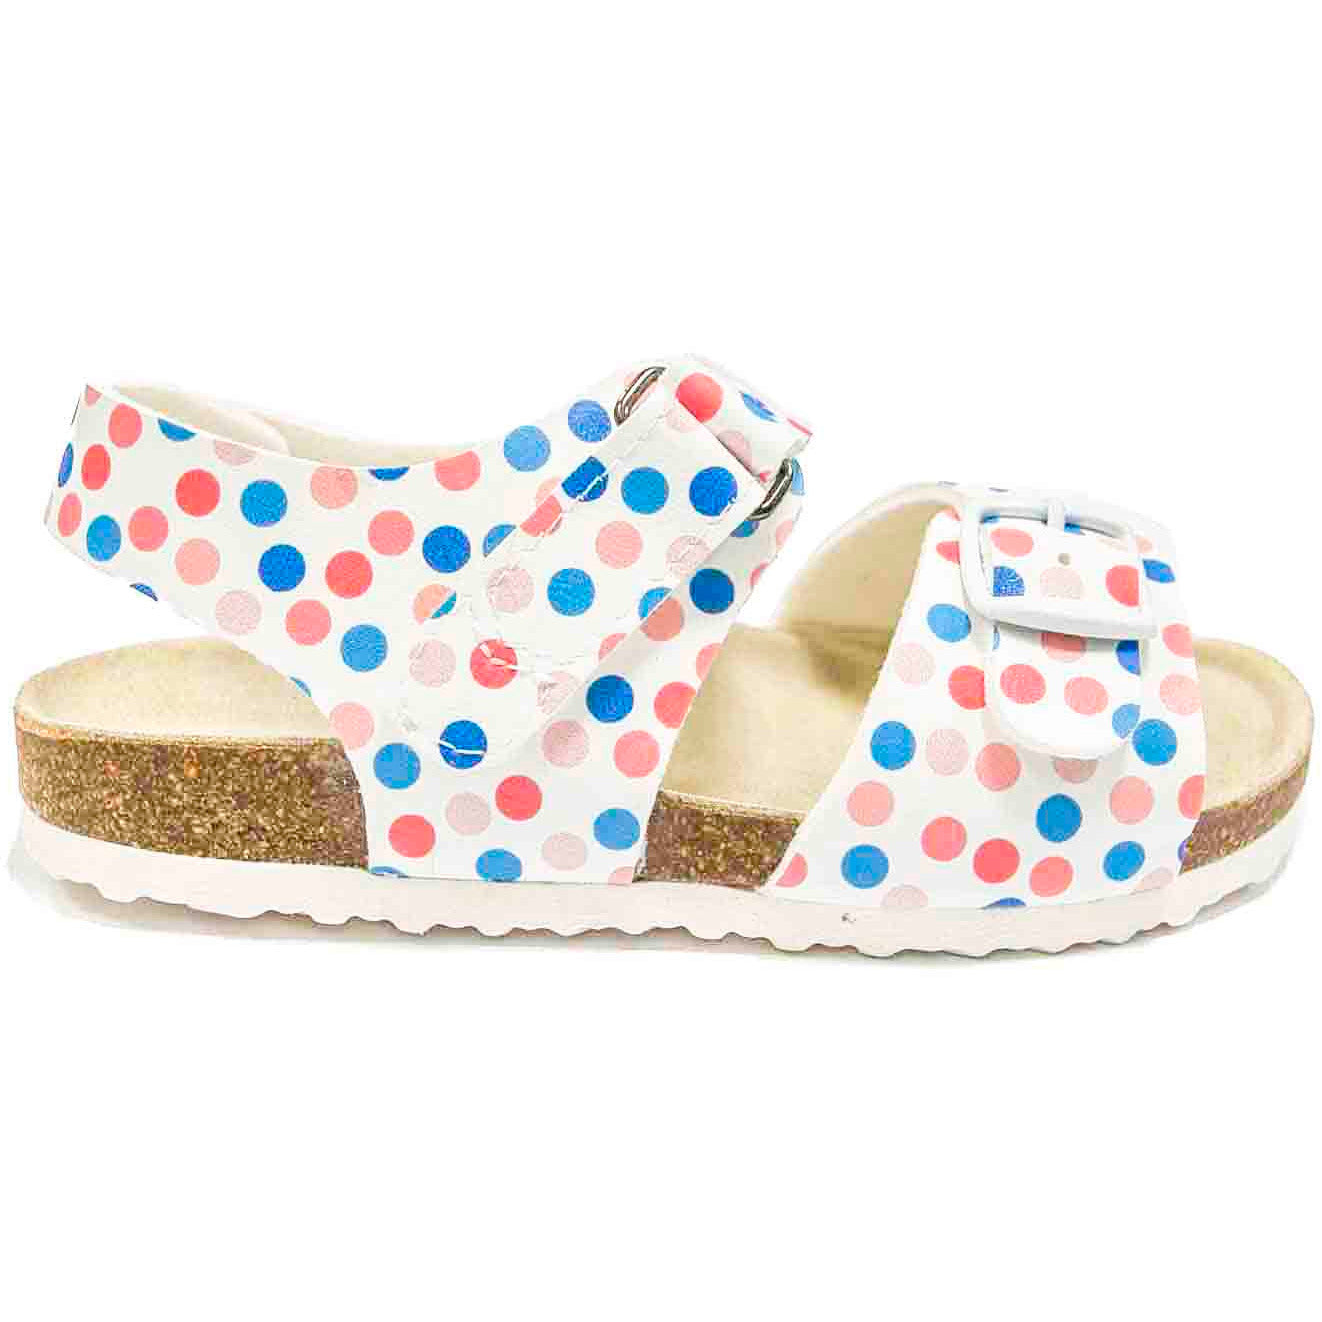 Cork orthopedic sandals for older girls, PROTETIKA brand. High arch support, deep heel foot bed, genuine leather insole. Cute polka dots design. An ankle strap for an exact fit.